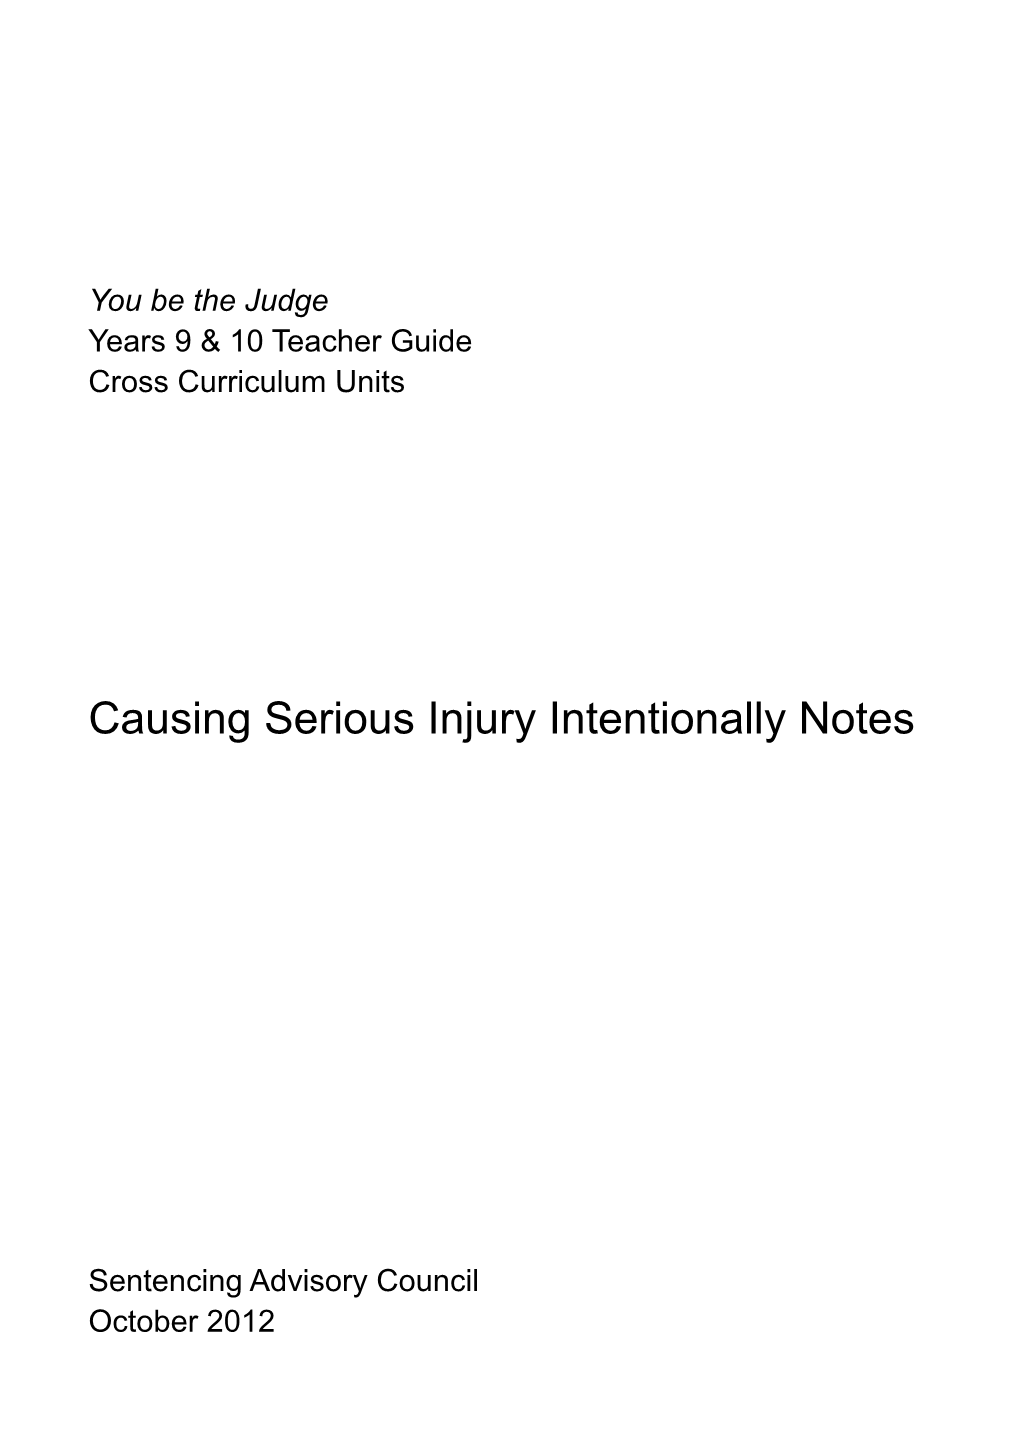 You Be the Judge VELS Causing Injury Notes